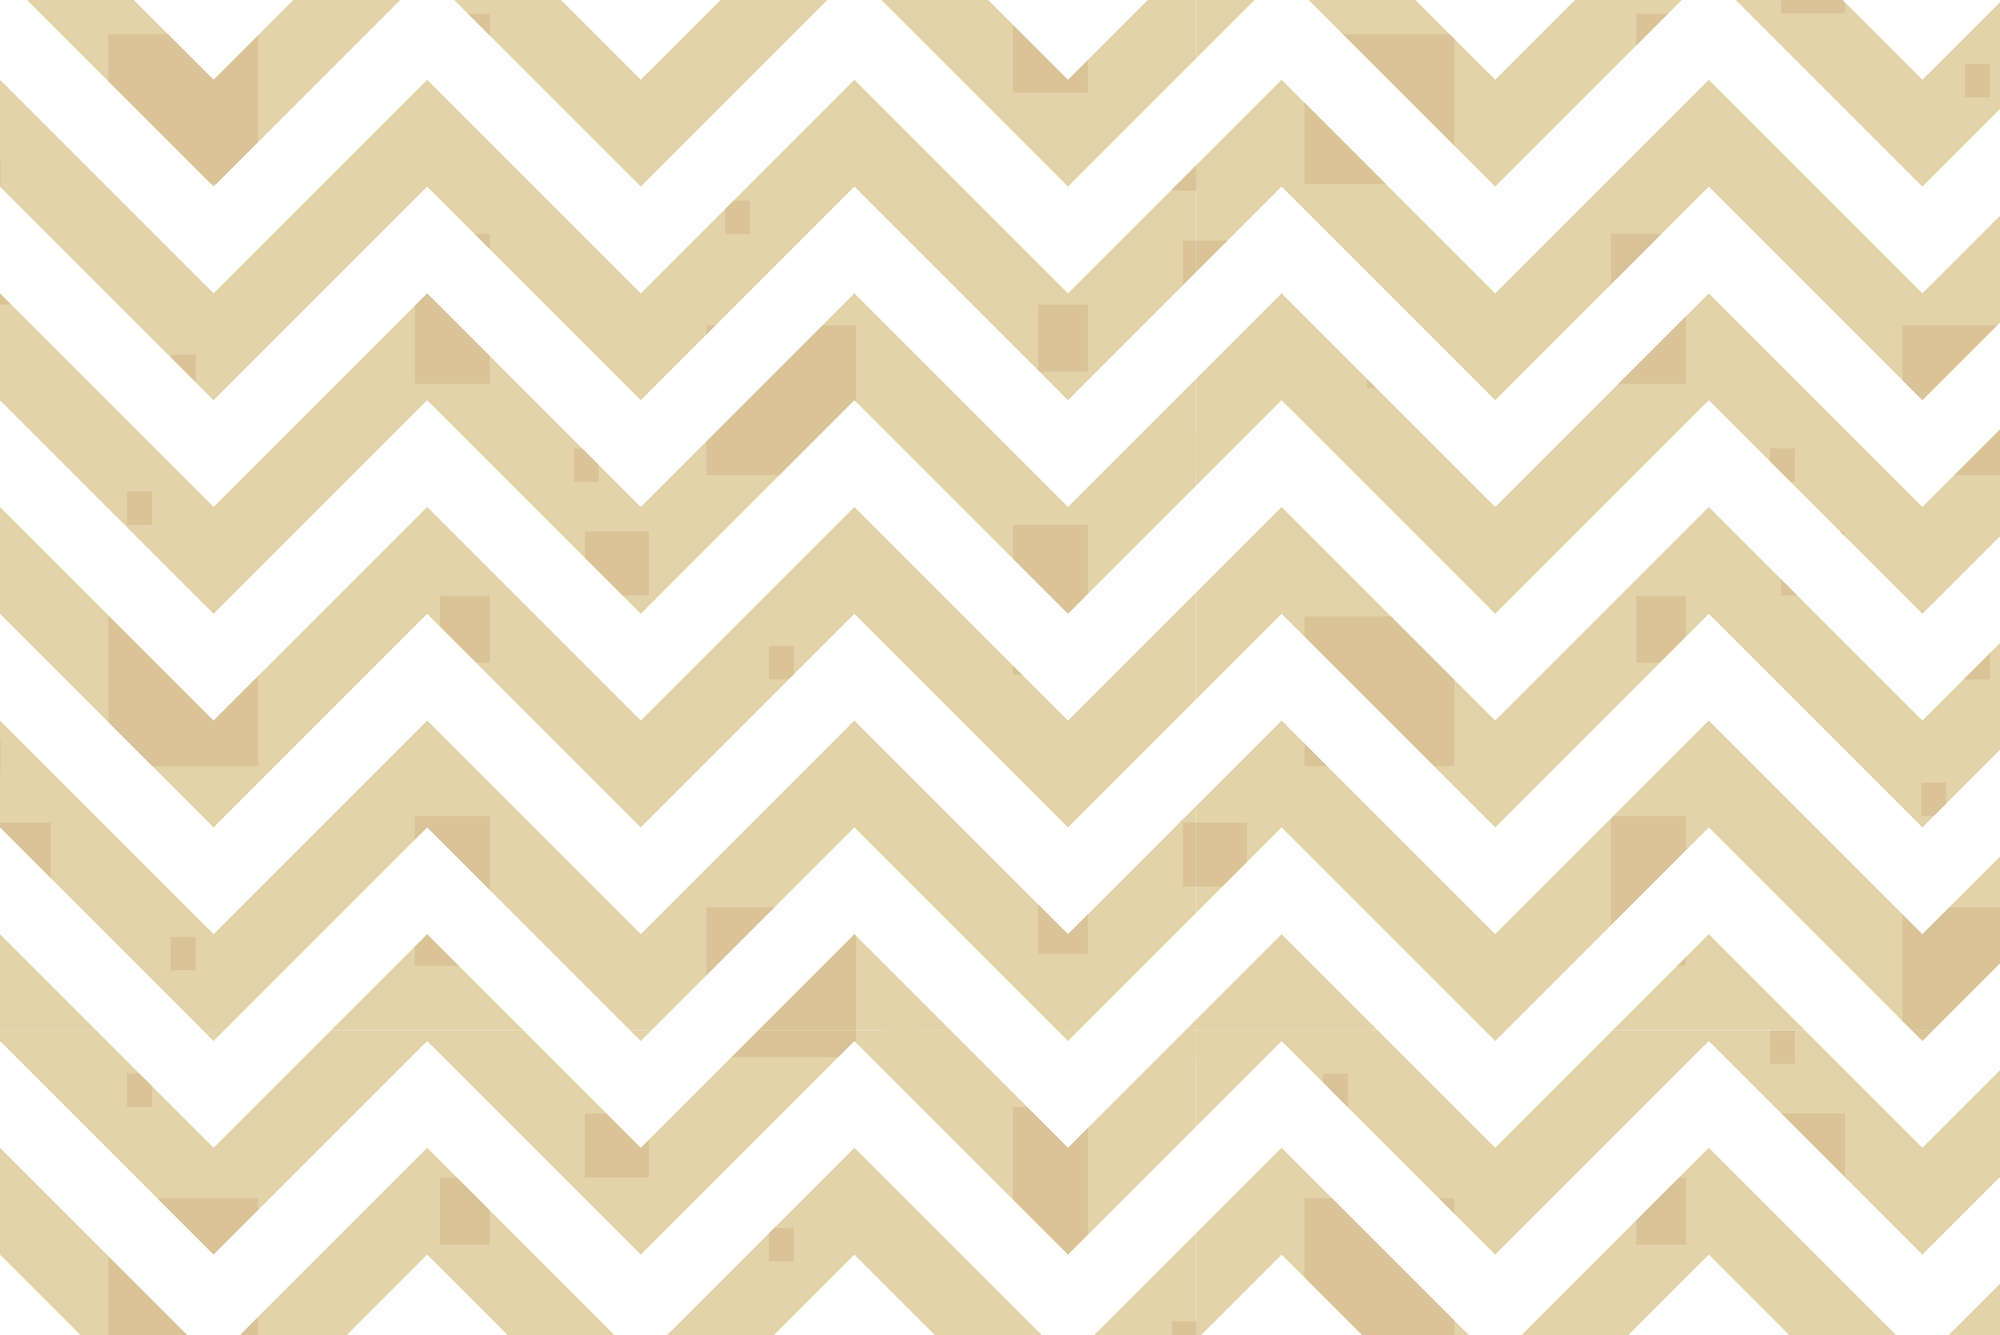             Design wallpaper zig zag pattern with small squares yellow on premium smooth non-woven
        